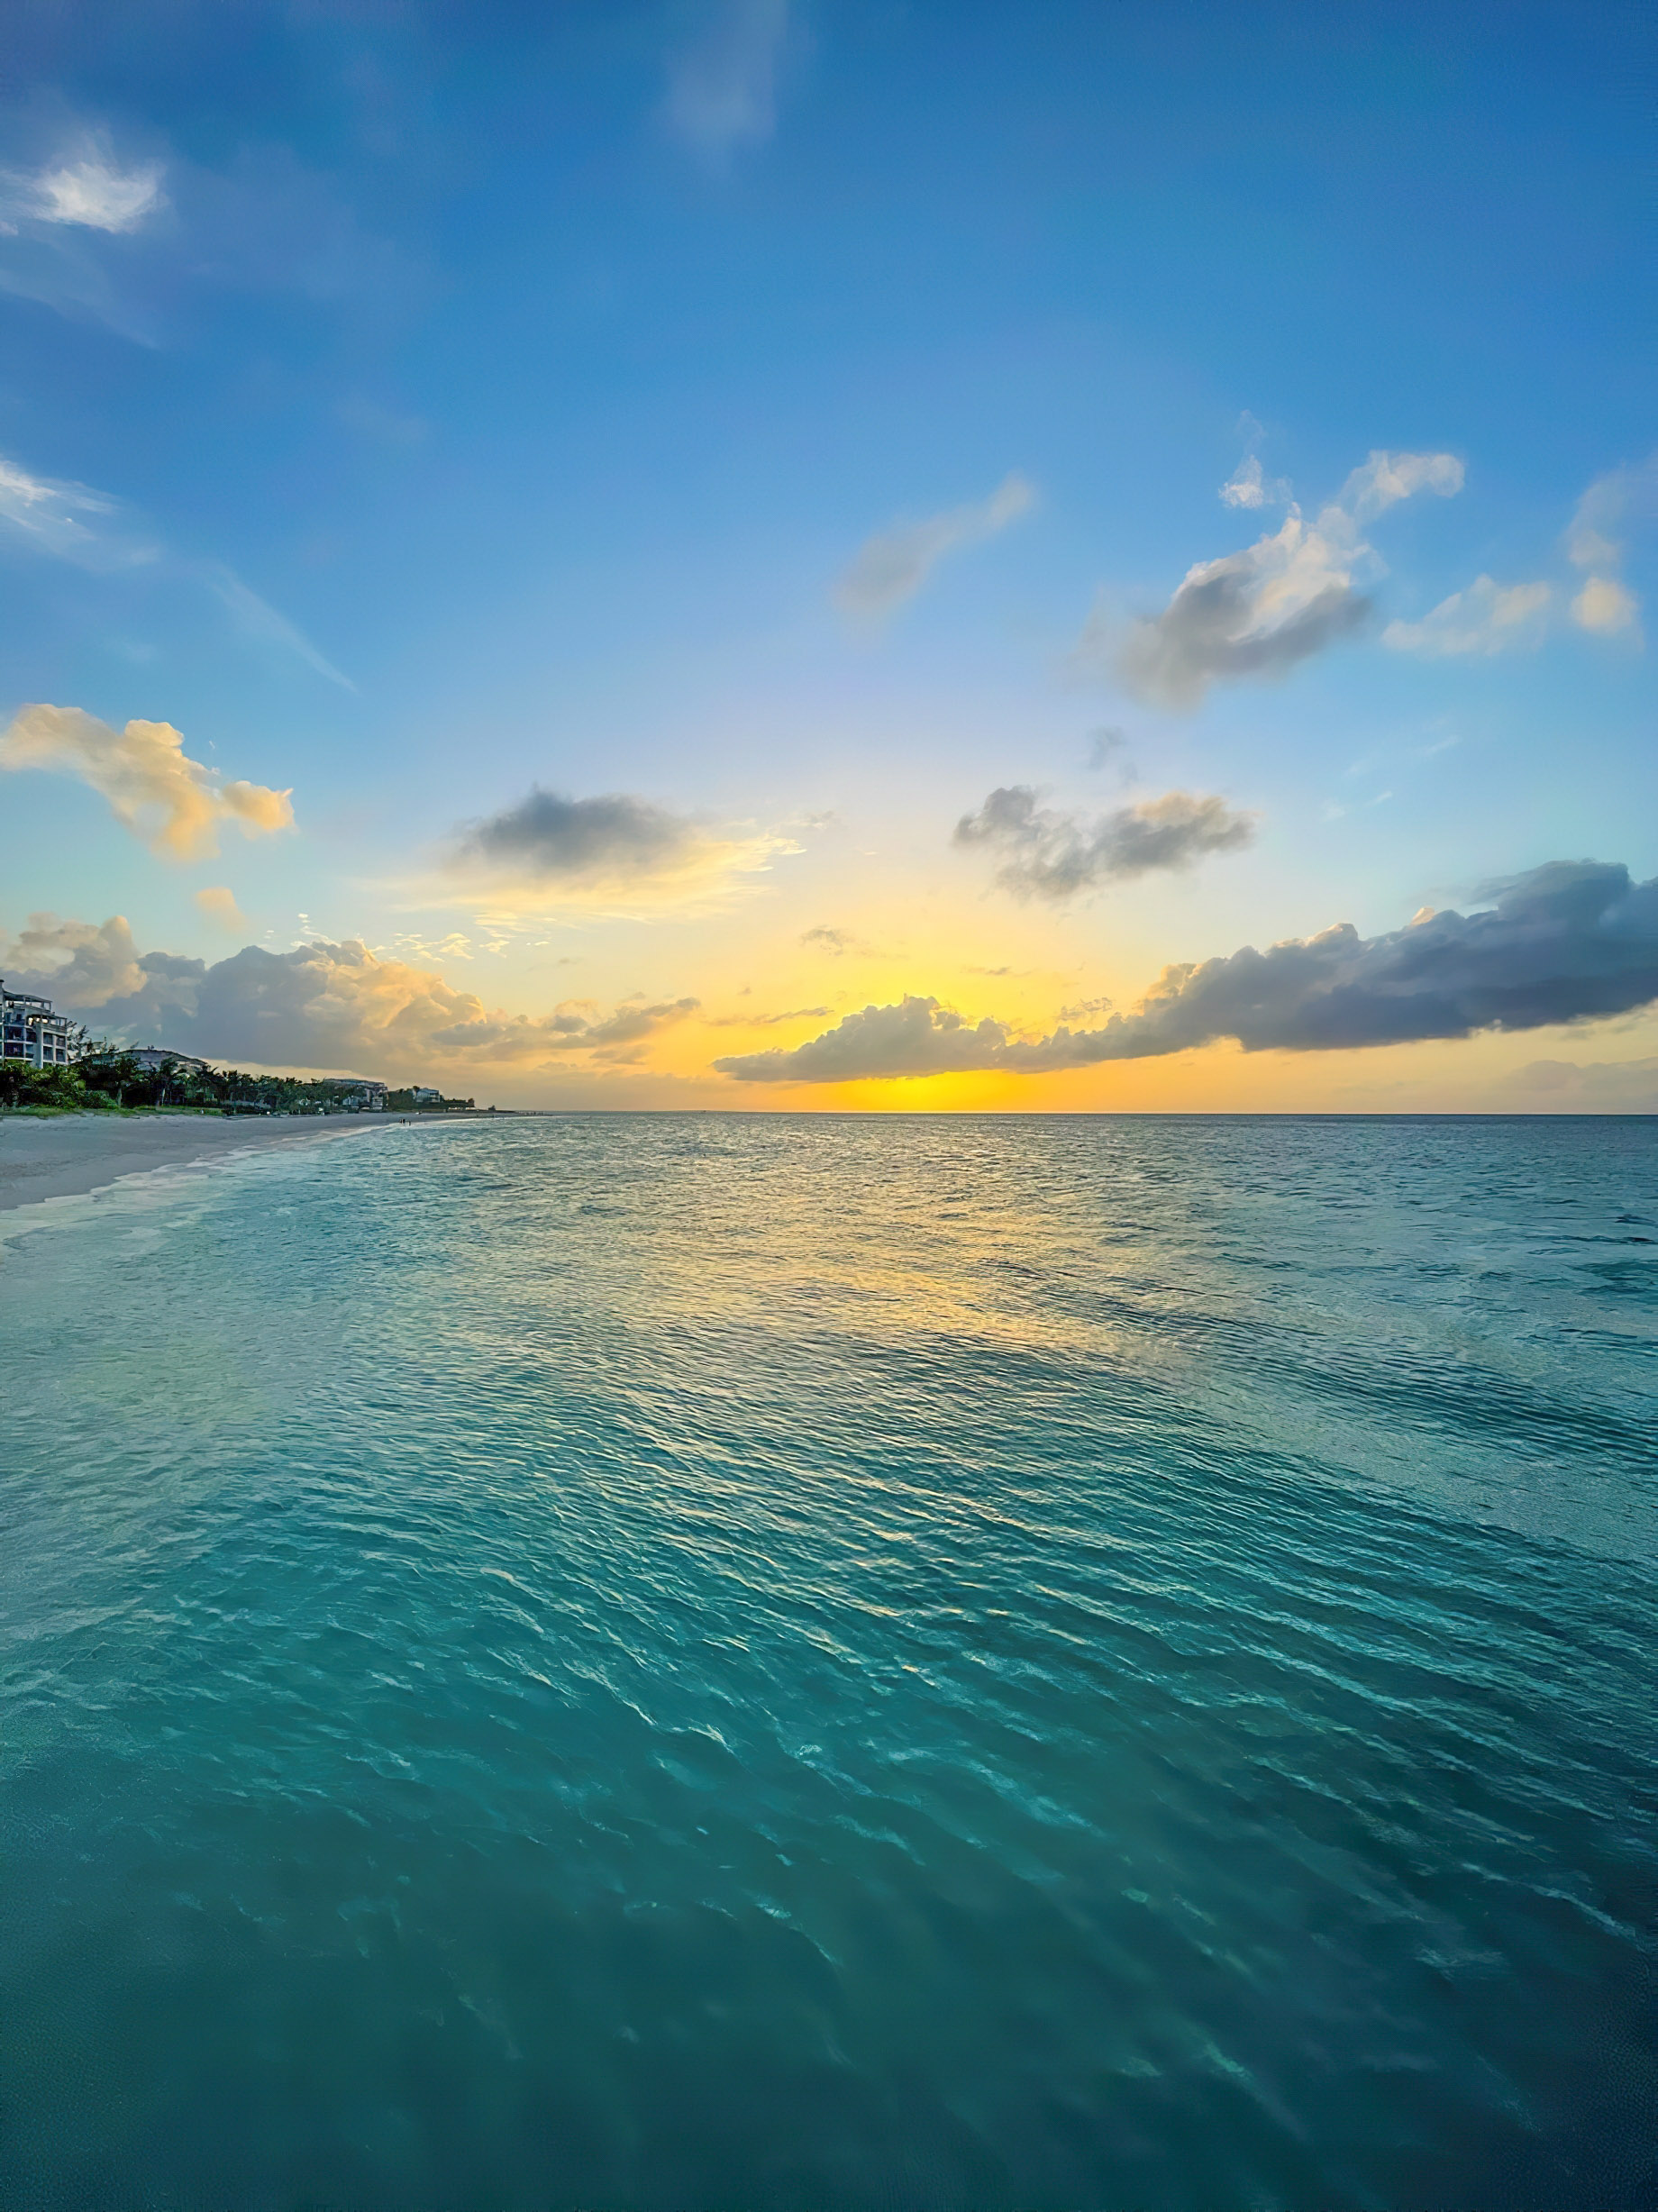 The Ritz-Carlton, Turks & Caicos Resort – Providenciales, Turks and Caicos Islands – Ocean View Sunset